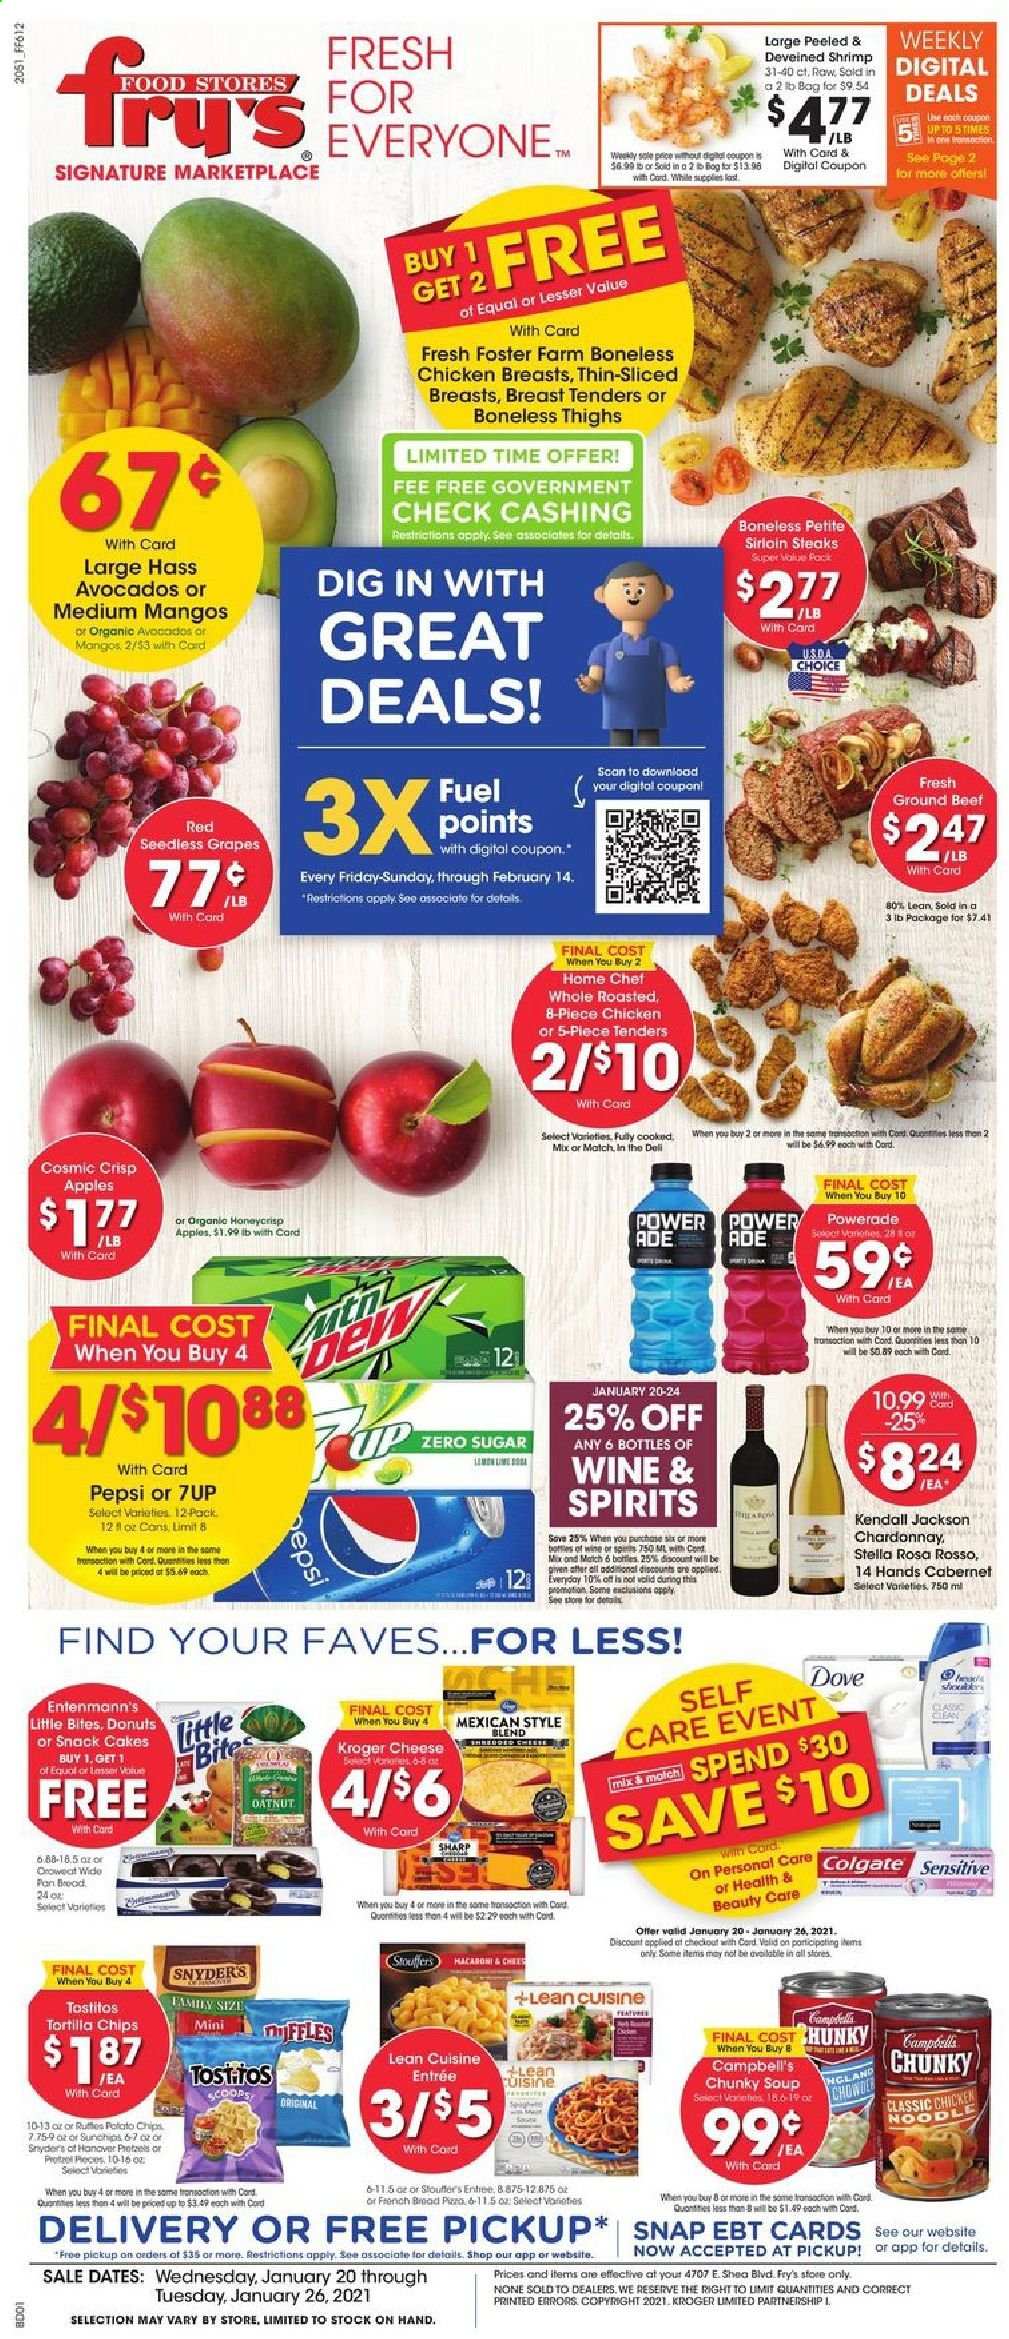 thumbnail - Fry’s Flyer - 01/20/2021 - 01/26/2021 - Sales products - seedless grapes, cake, donut, Entenmann's, Little Bites, apples, shrimps, Campbell's, pizza, soup, Lean Cuisine, cheese, mango, tortilla chips, chips, snack, Tostitos, noodles, Powerade, Pepsi, 7UP, Cabernet Sauvignon, Chardonnay, wine, chicken breasts, beef meat, ground beef, steak, Dove, Colgate, pan, N All, Sharp. Page 1.